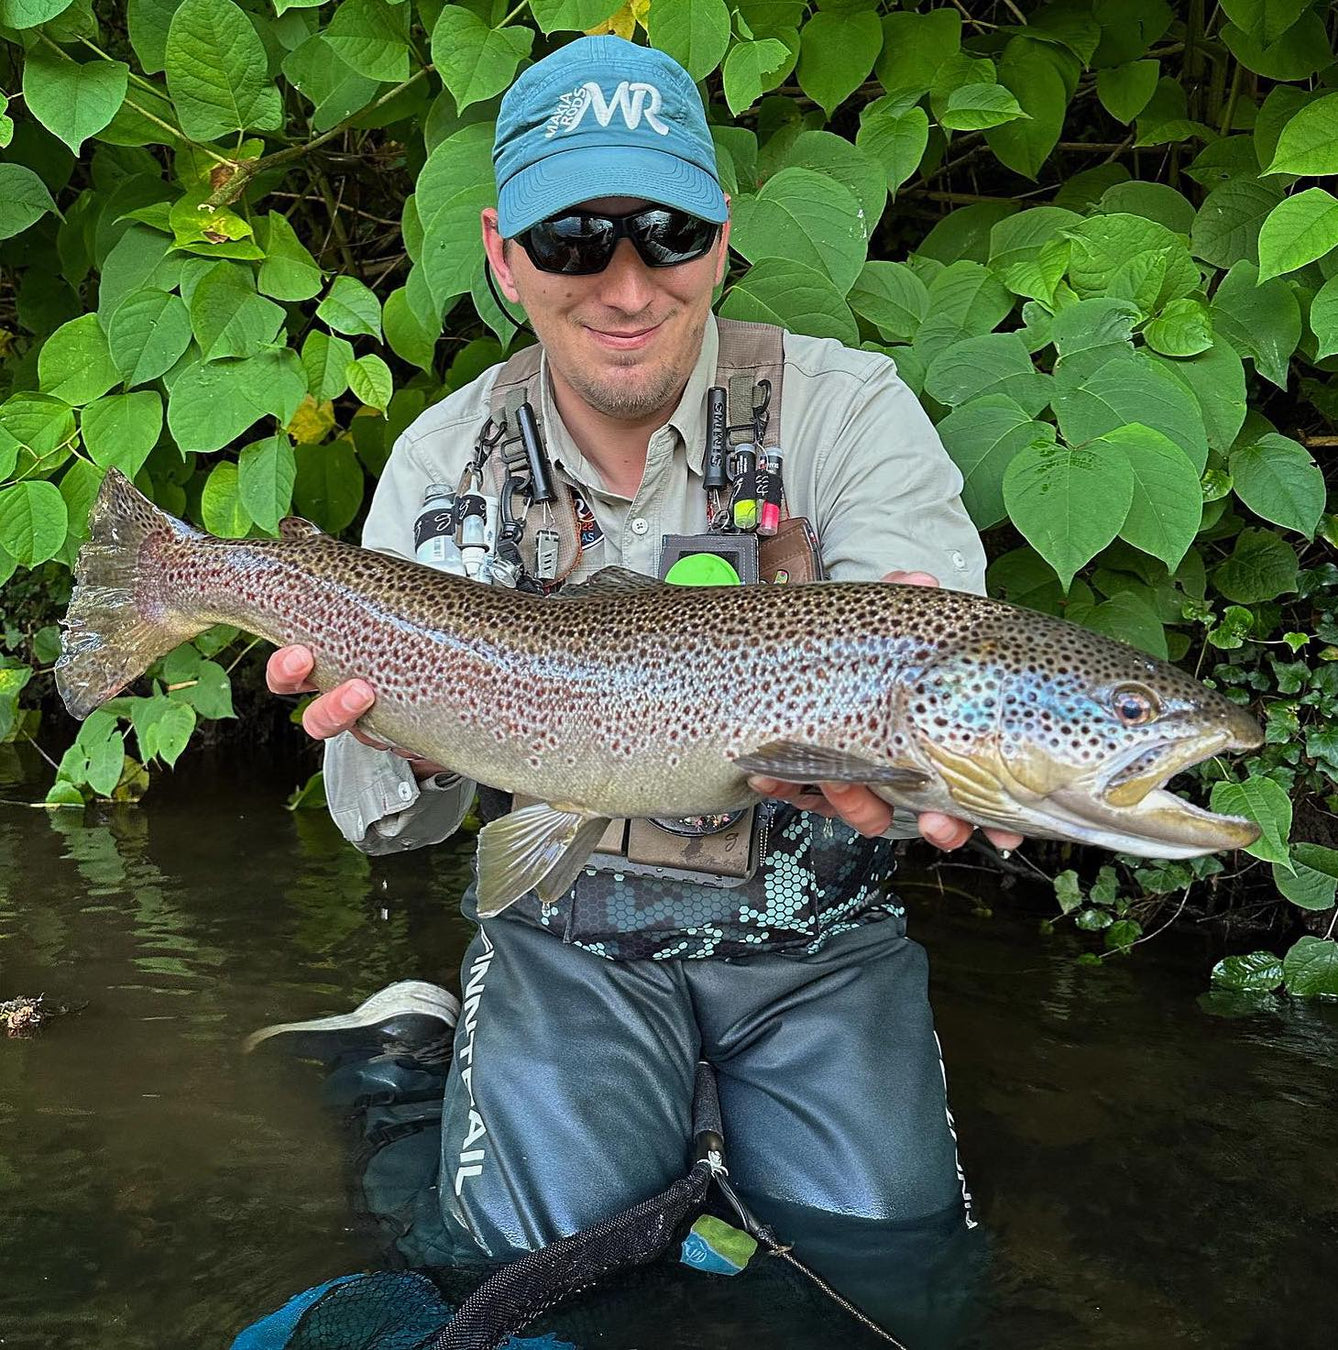 Upavon Fly Fishing: Fly Fishing Tackle & Fly Tying Supplies